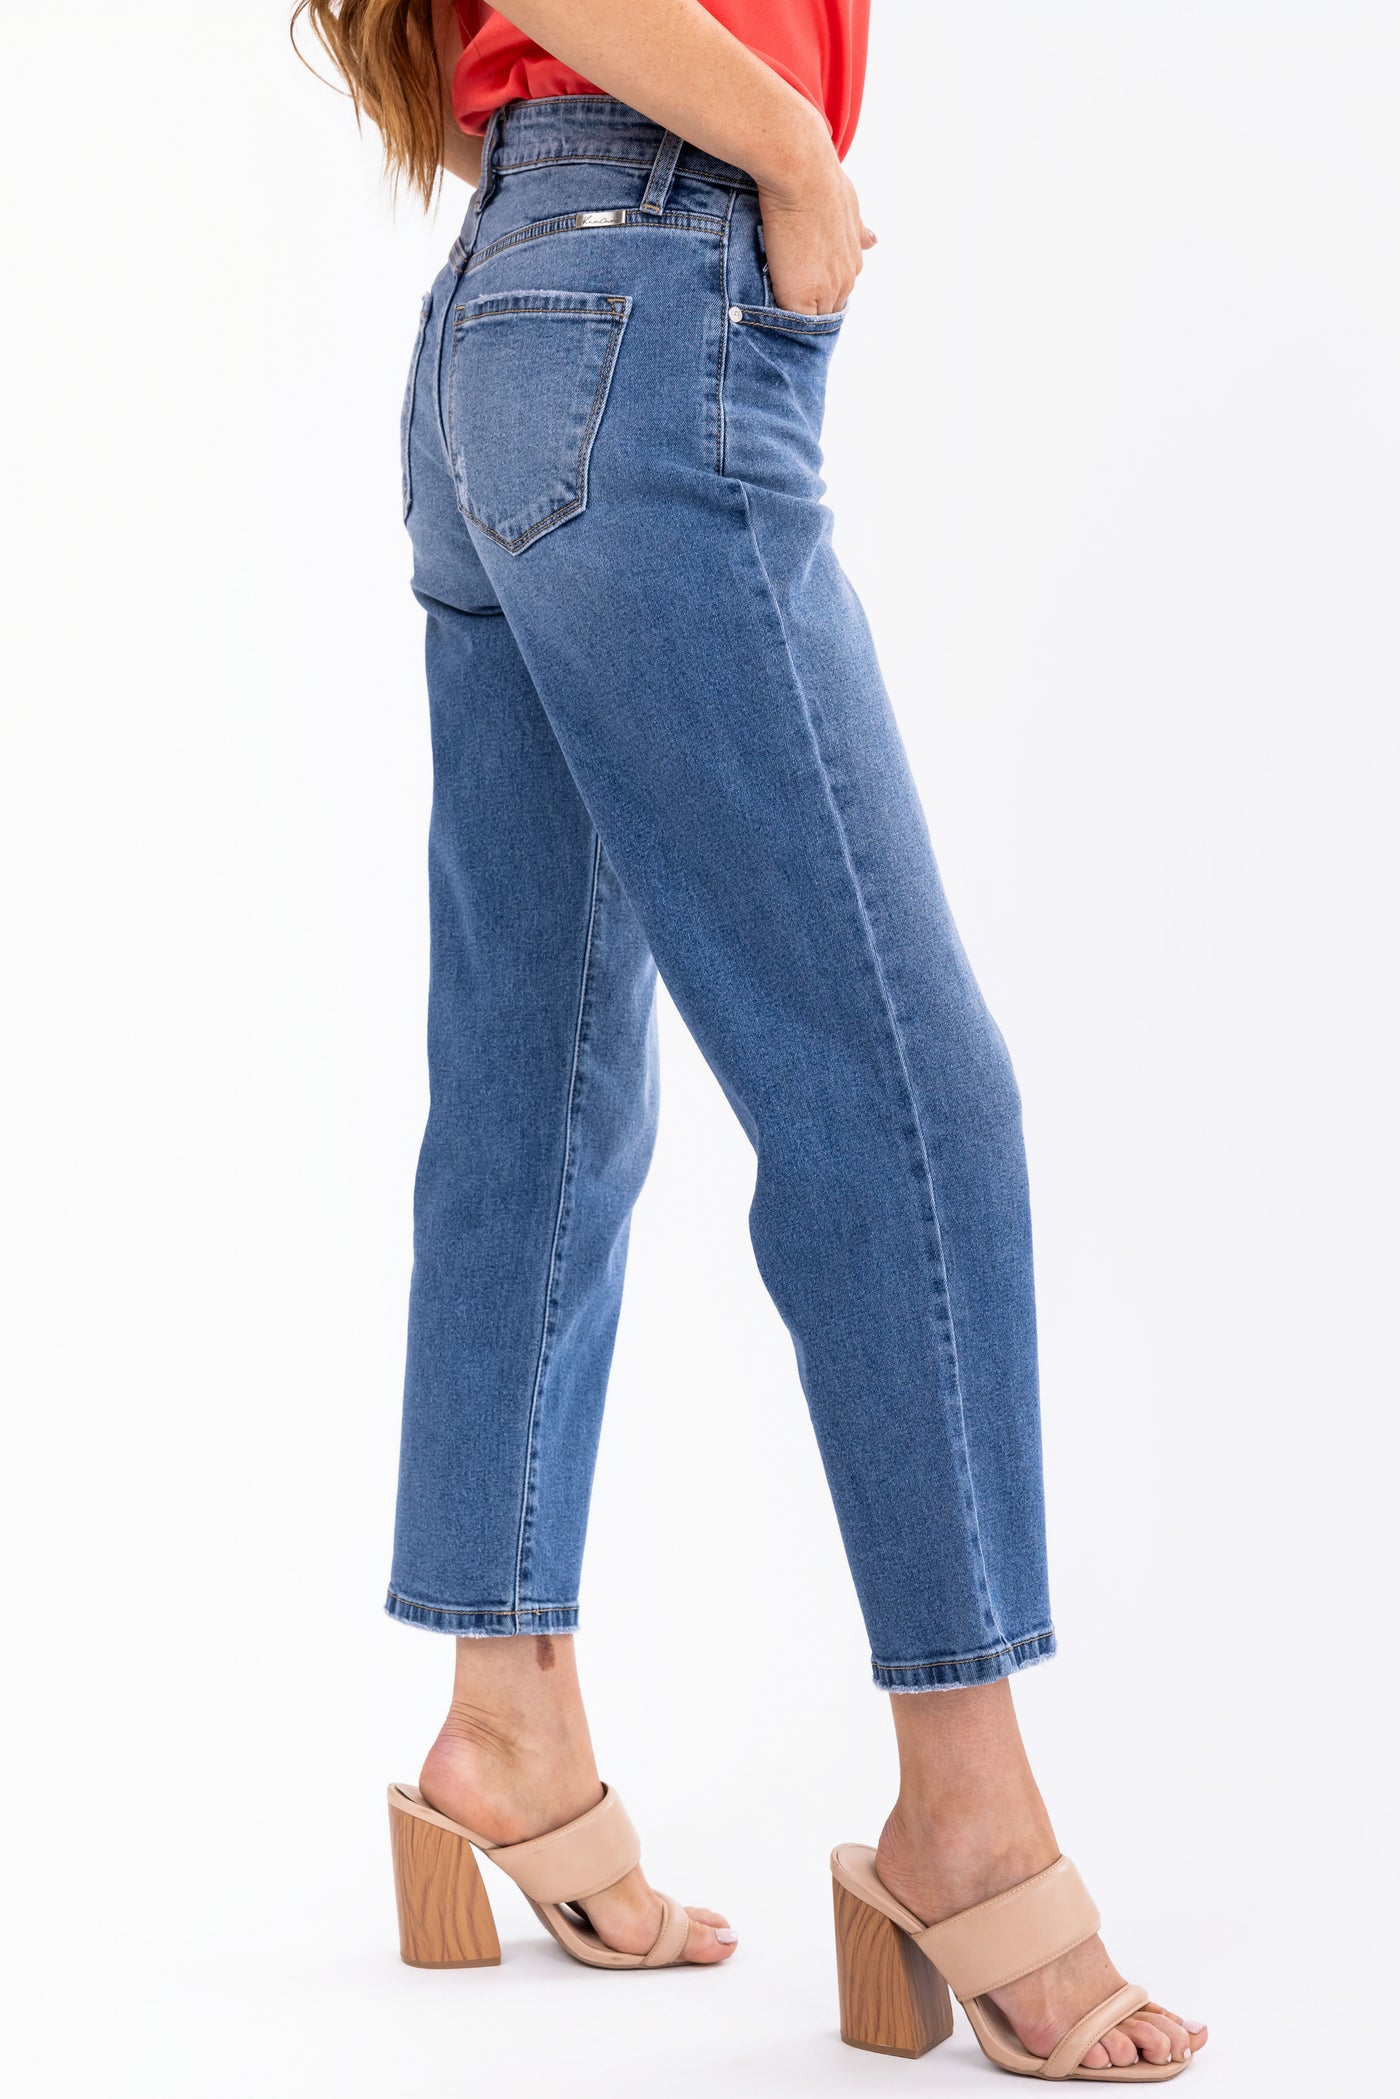 KanCan Comfort Stretch High Rise Straight Jeans